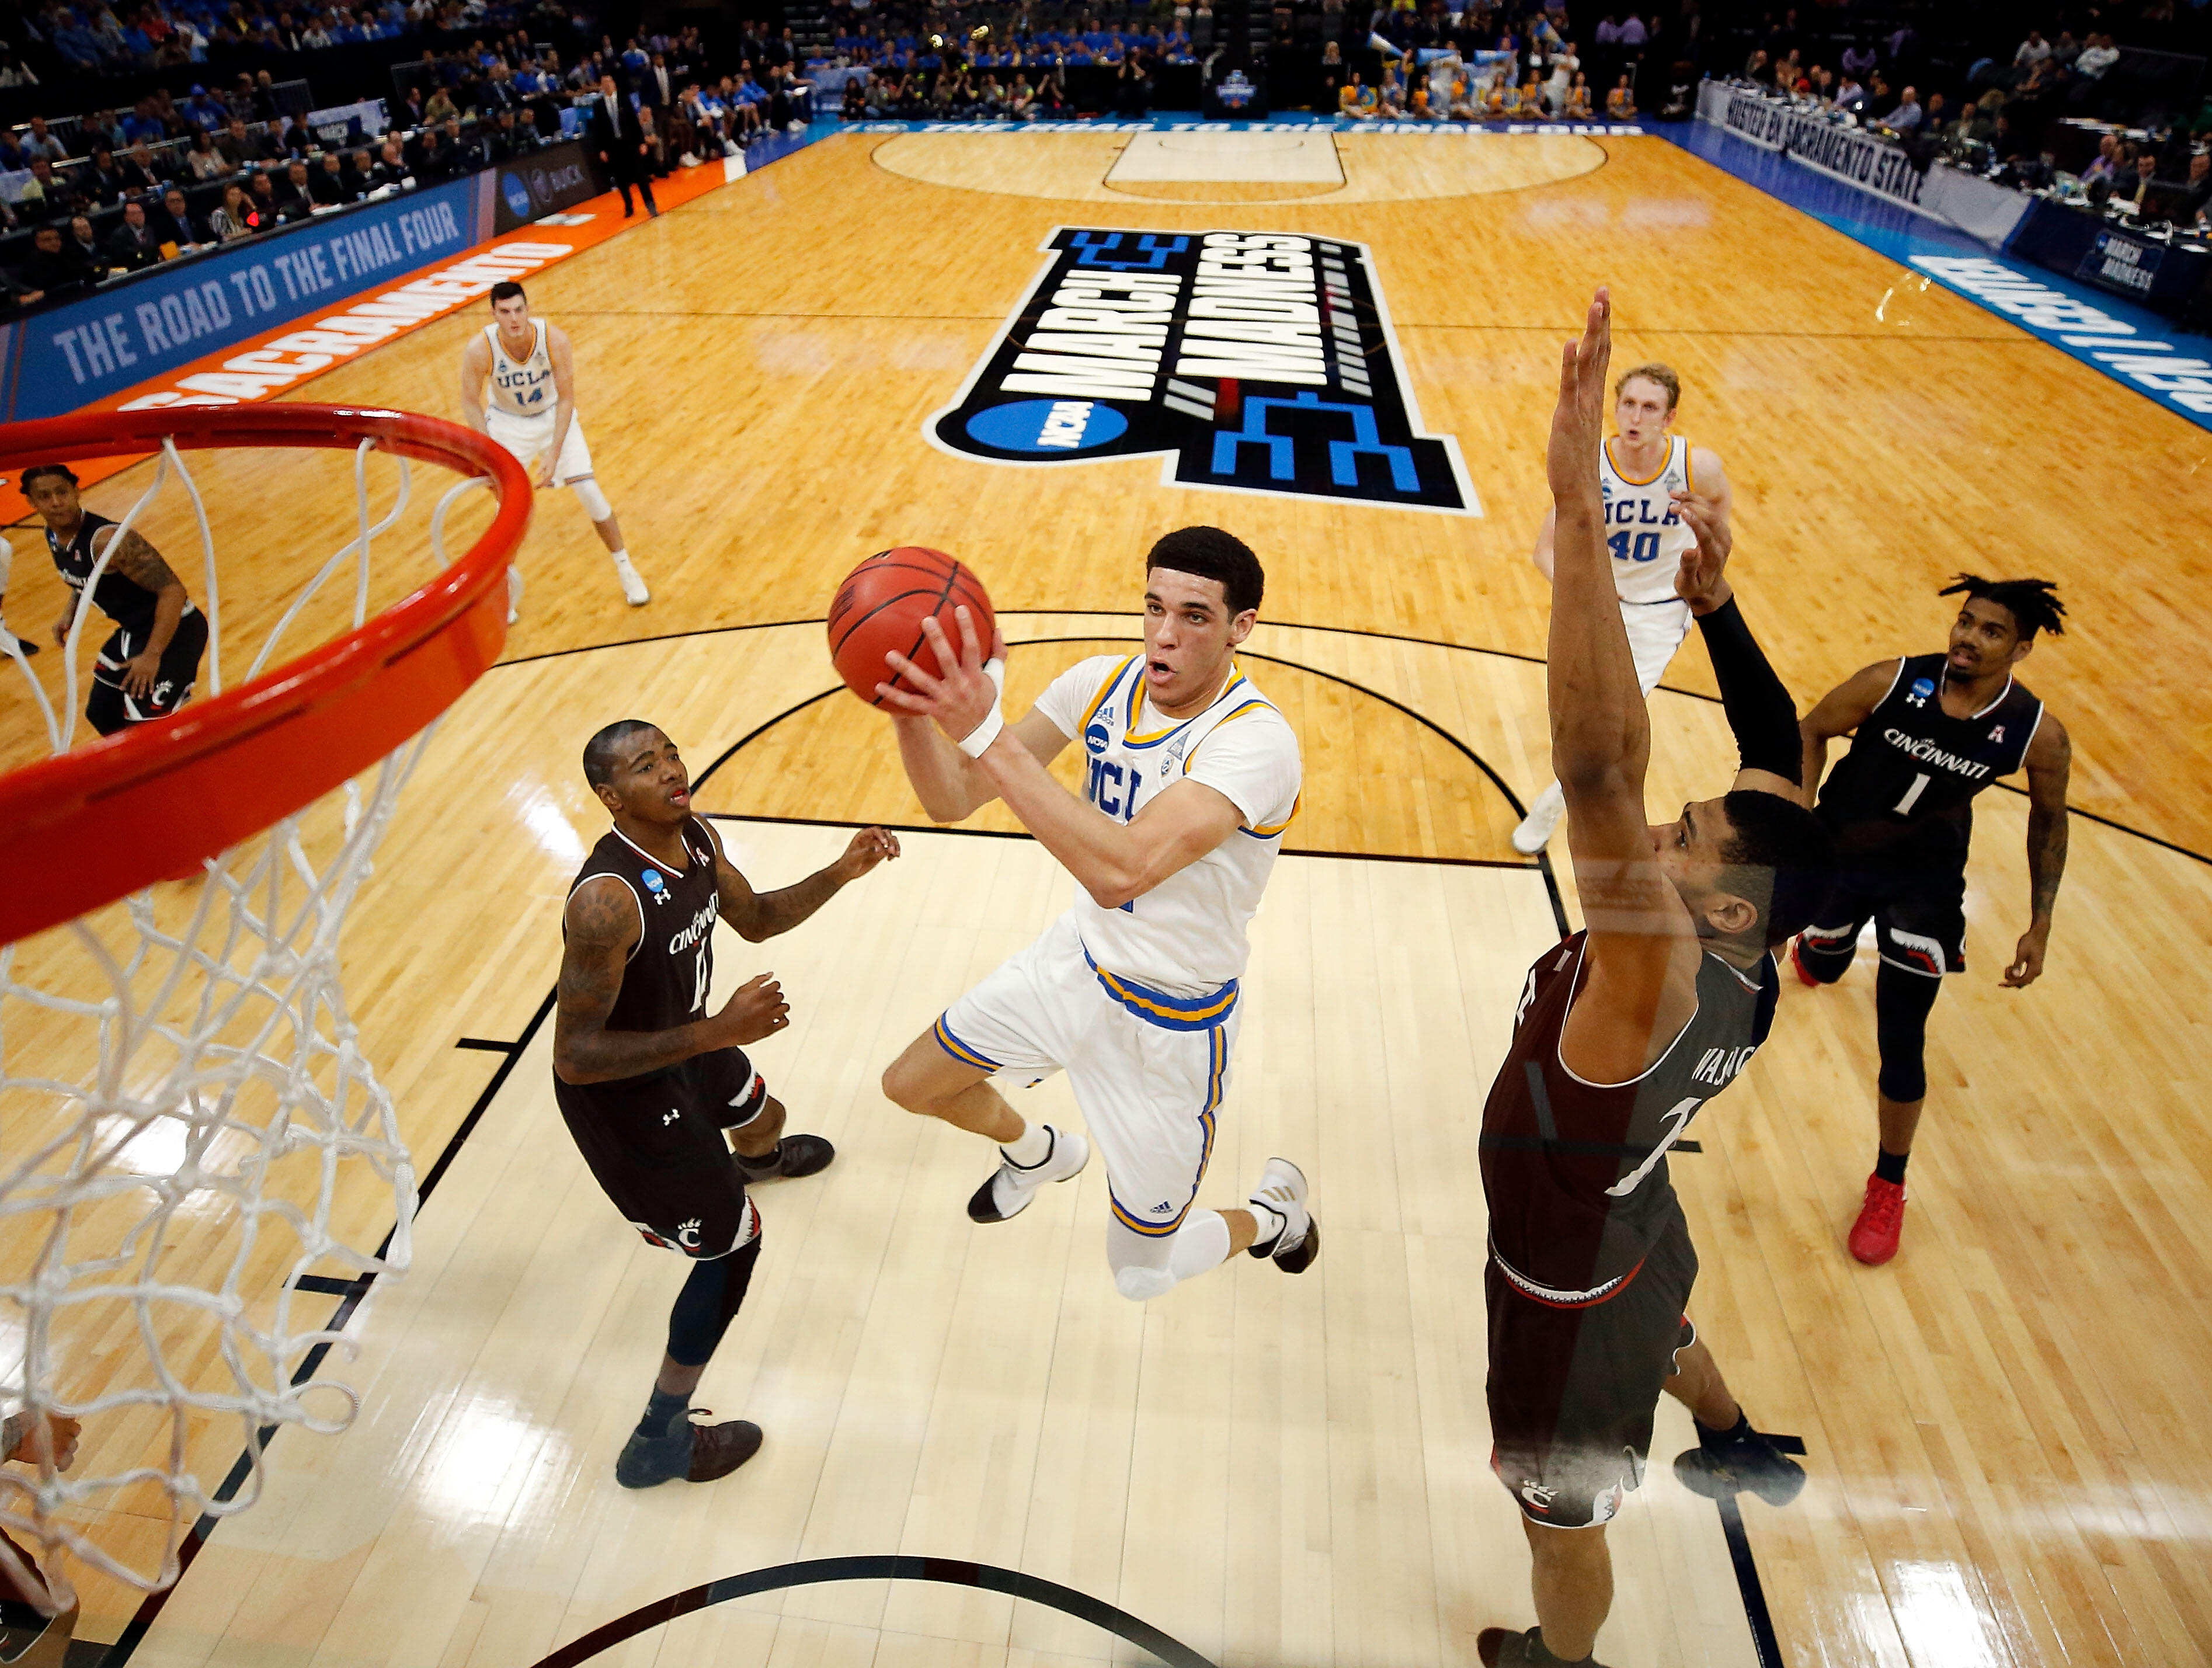 SACRAMENTO, CA - MARCH 19: Lonzo Ball #2 of the UCLA Bruins drives to the basket as Kyle Washington #24 of the Cincinnati Bearcats defends during the second round of the NCAA Basketball Tournament at Golden 1 Center on March 19, 2017 in Sacramento, Califo